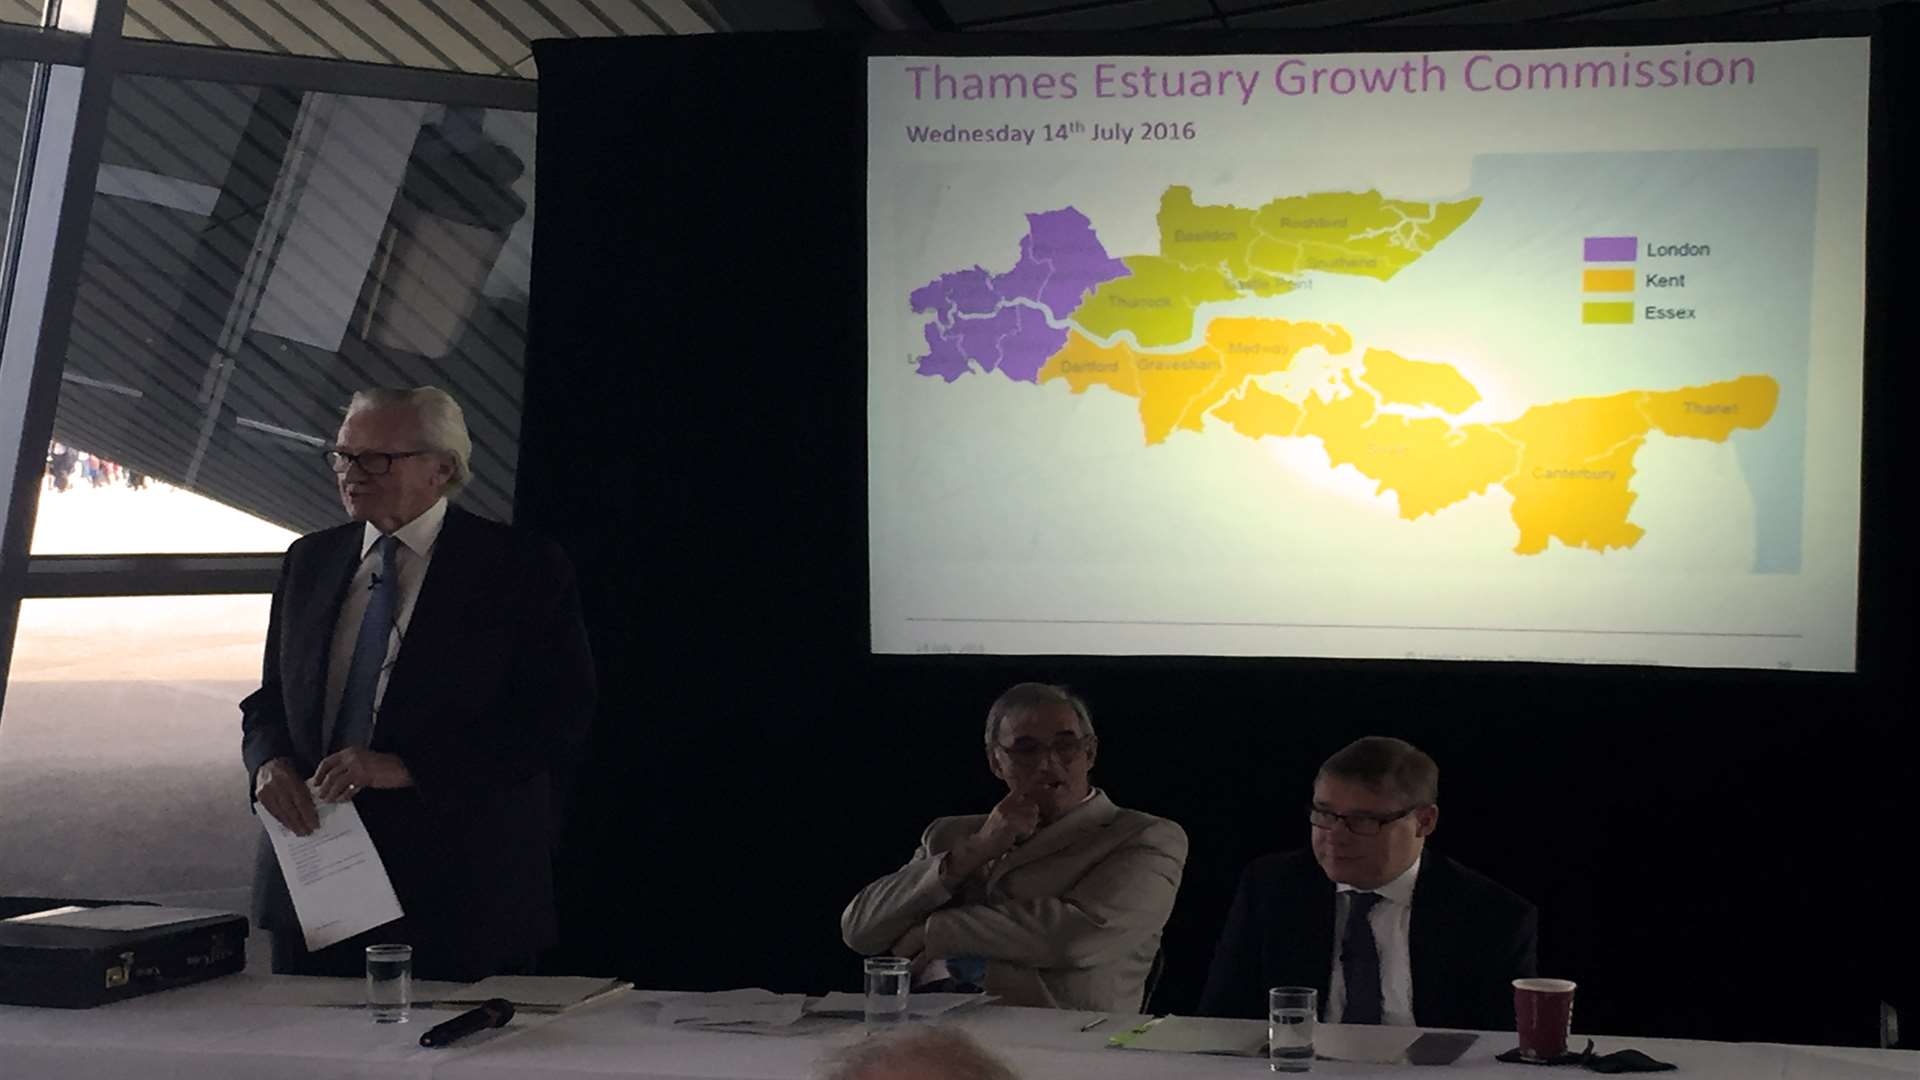 Lord Heseltine launches the Thames Estuary 2050 Growth Commission at the Olympic Park